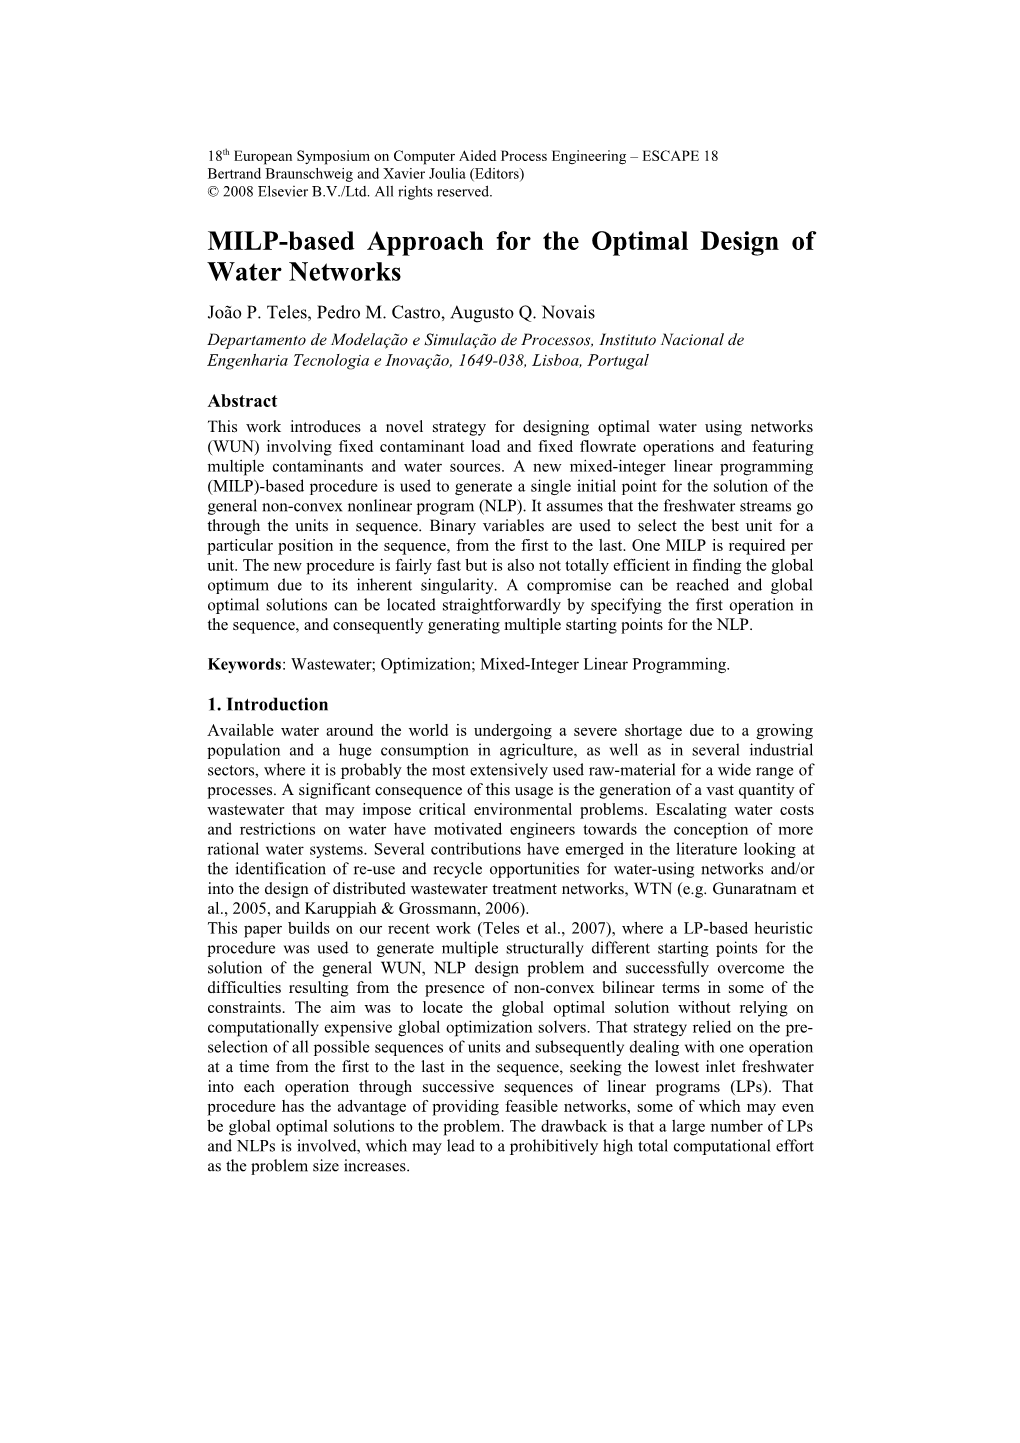 MILP-Based Approach for the Optimal Design of Water Networks